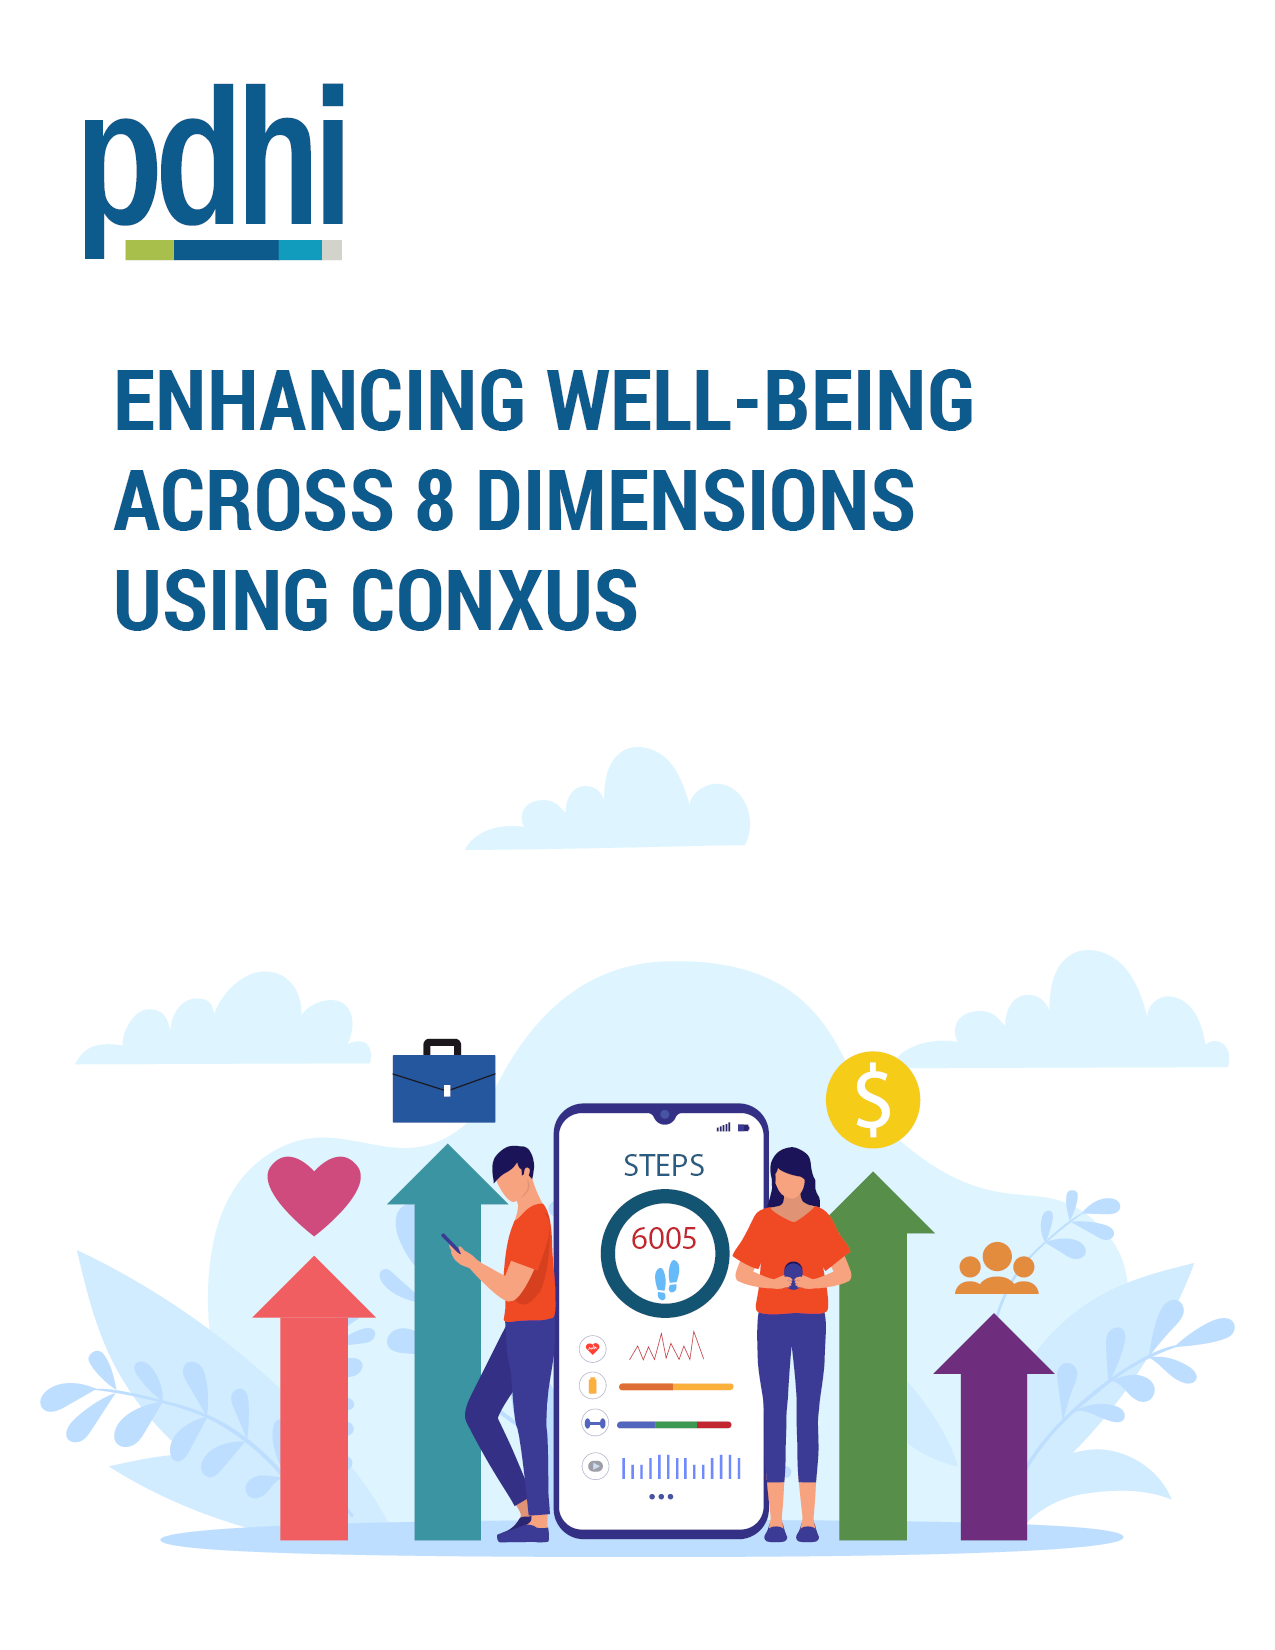 Enhancing Well-Being Across 8 Dimensions Using Conxus